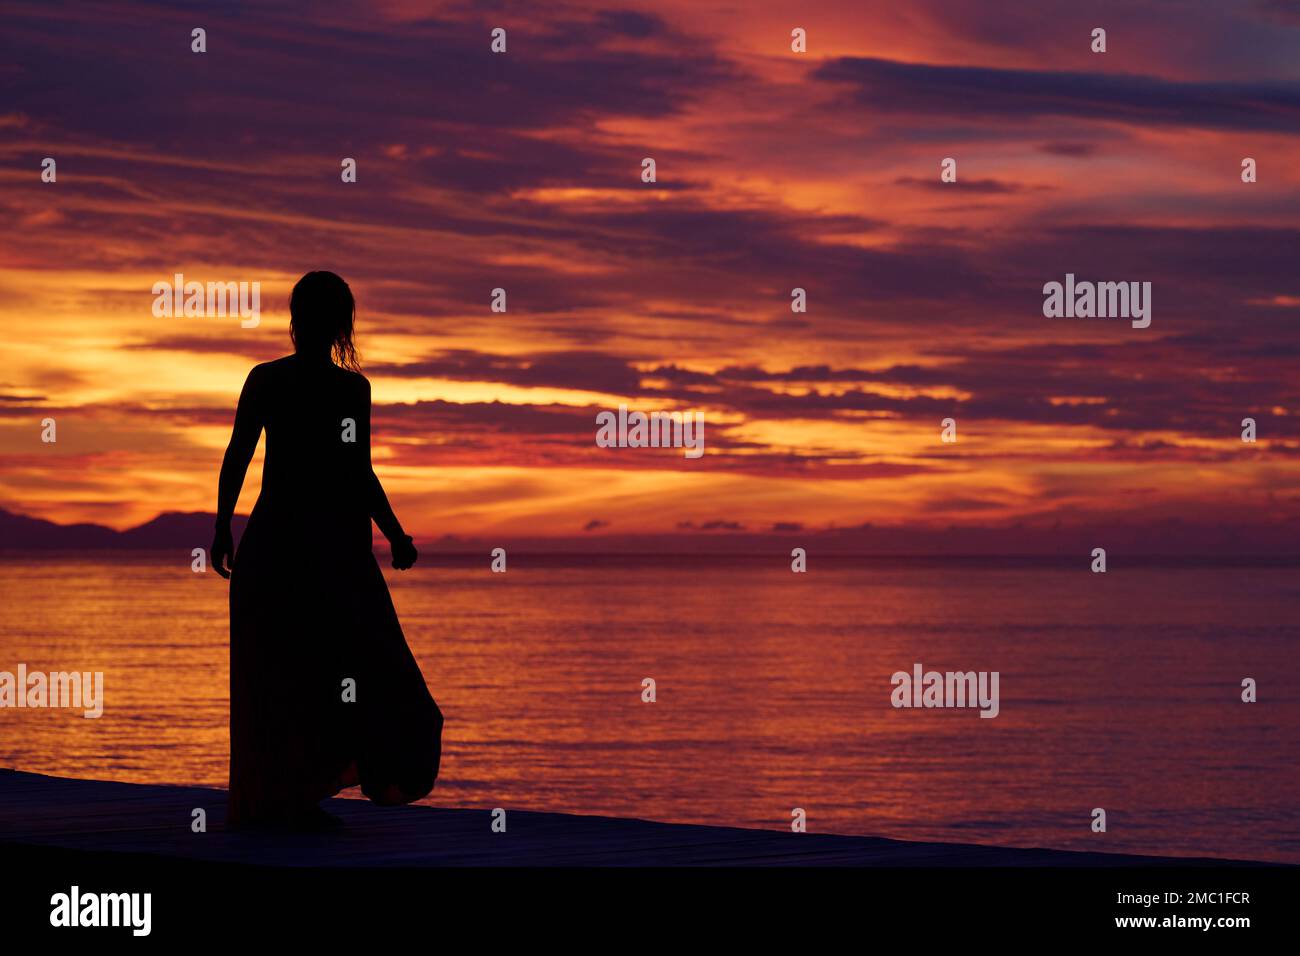 Silhouette of a woman watching the sunset over  Raja Ampat Islands, Indonesia. Stock Photo